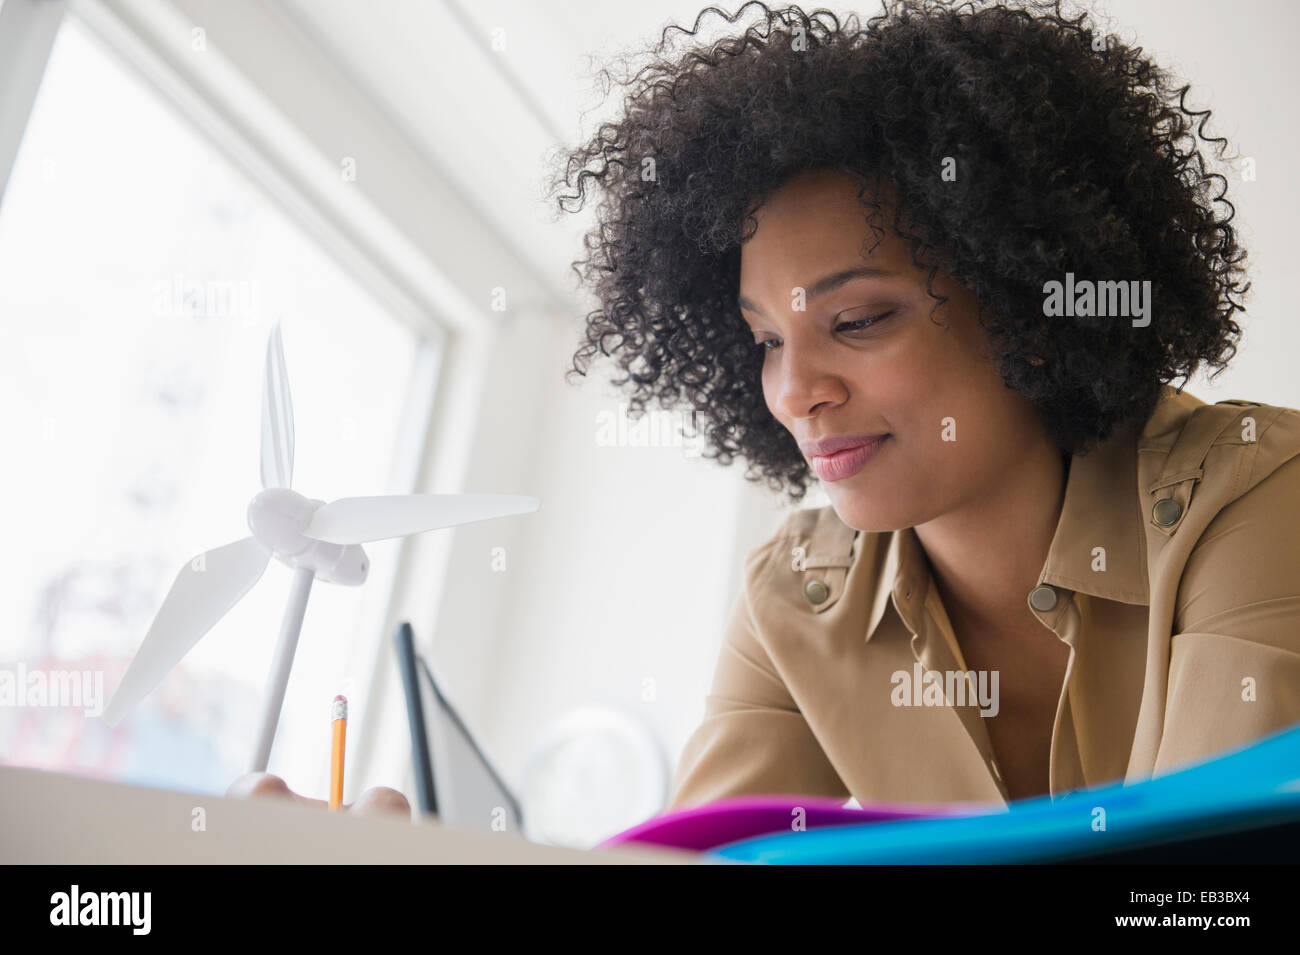 Low angle view of businesswoman working at desk Stock Photo